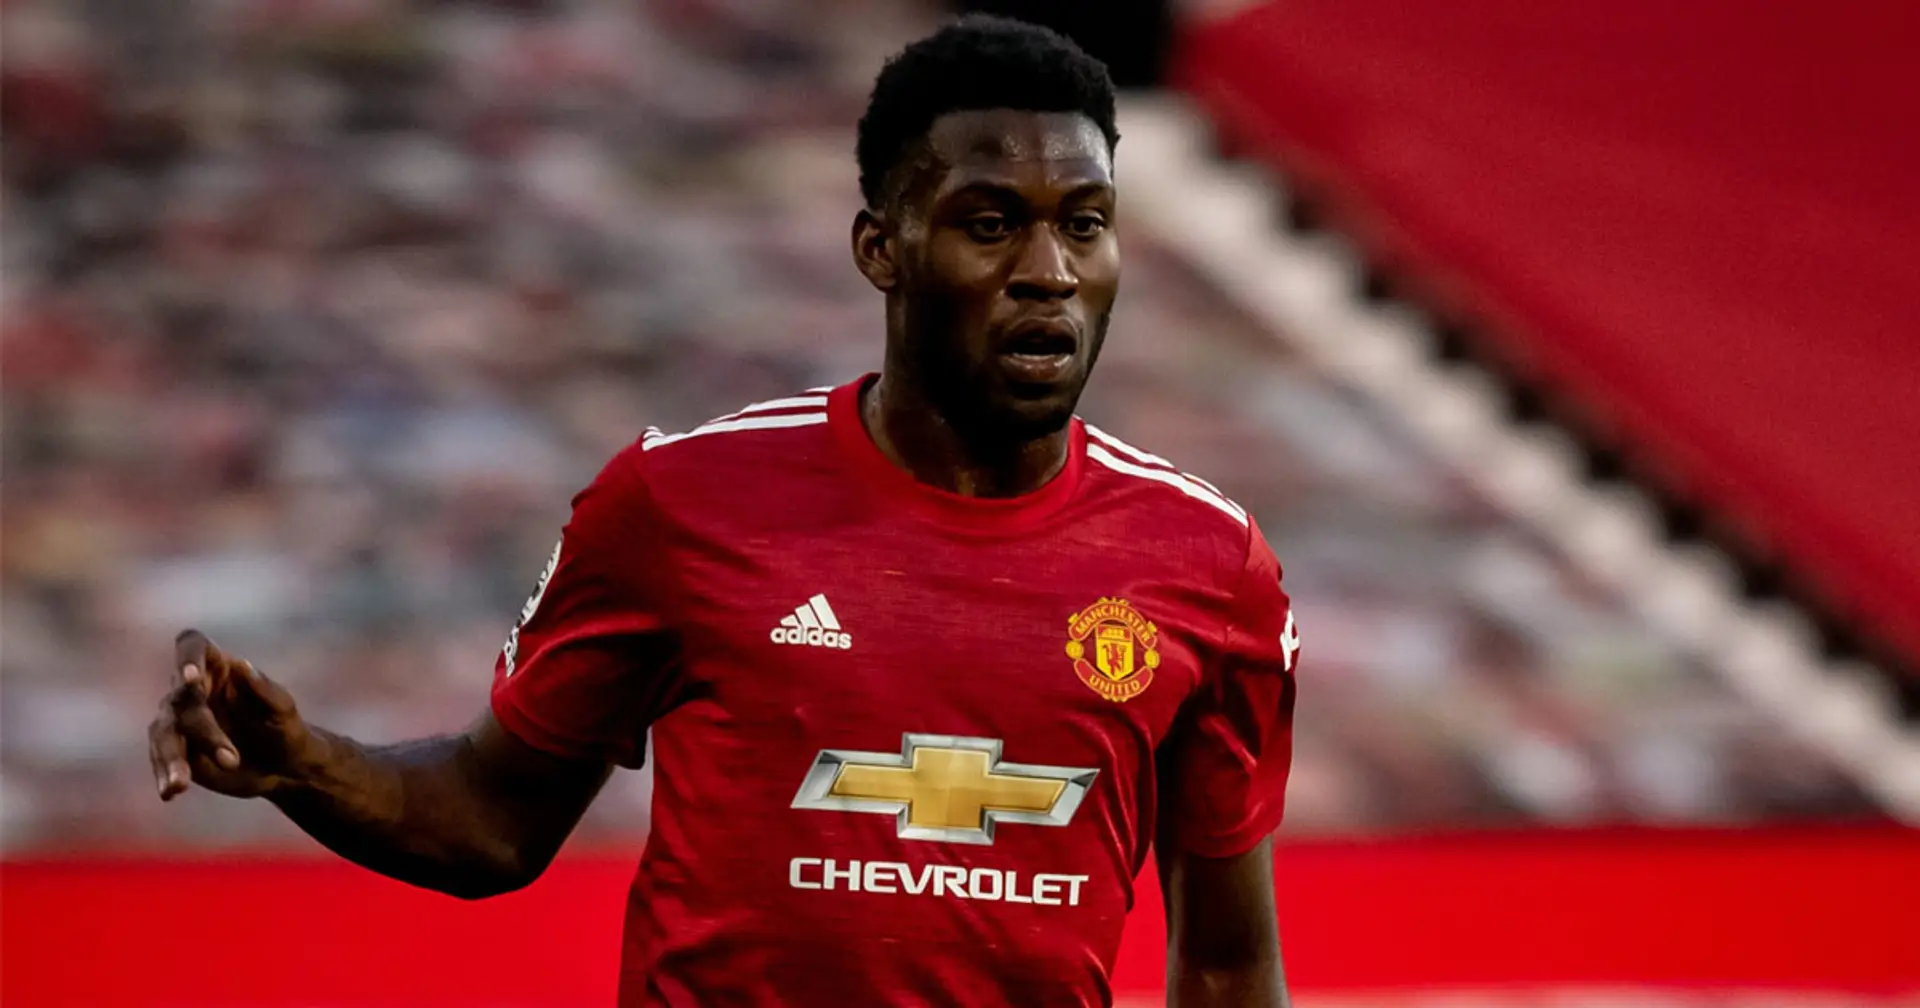 ‘He’s at the stage where he needs to go and play’: Solskjaer confirms Fosu-Mensah will be allowed to leave in January